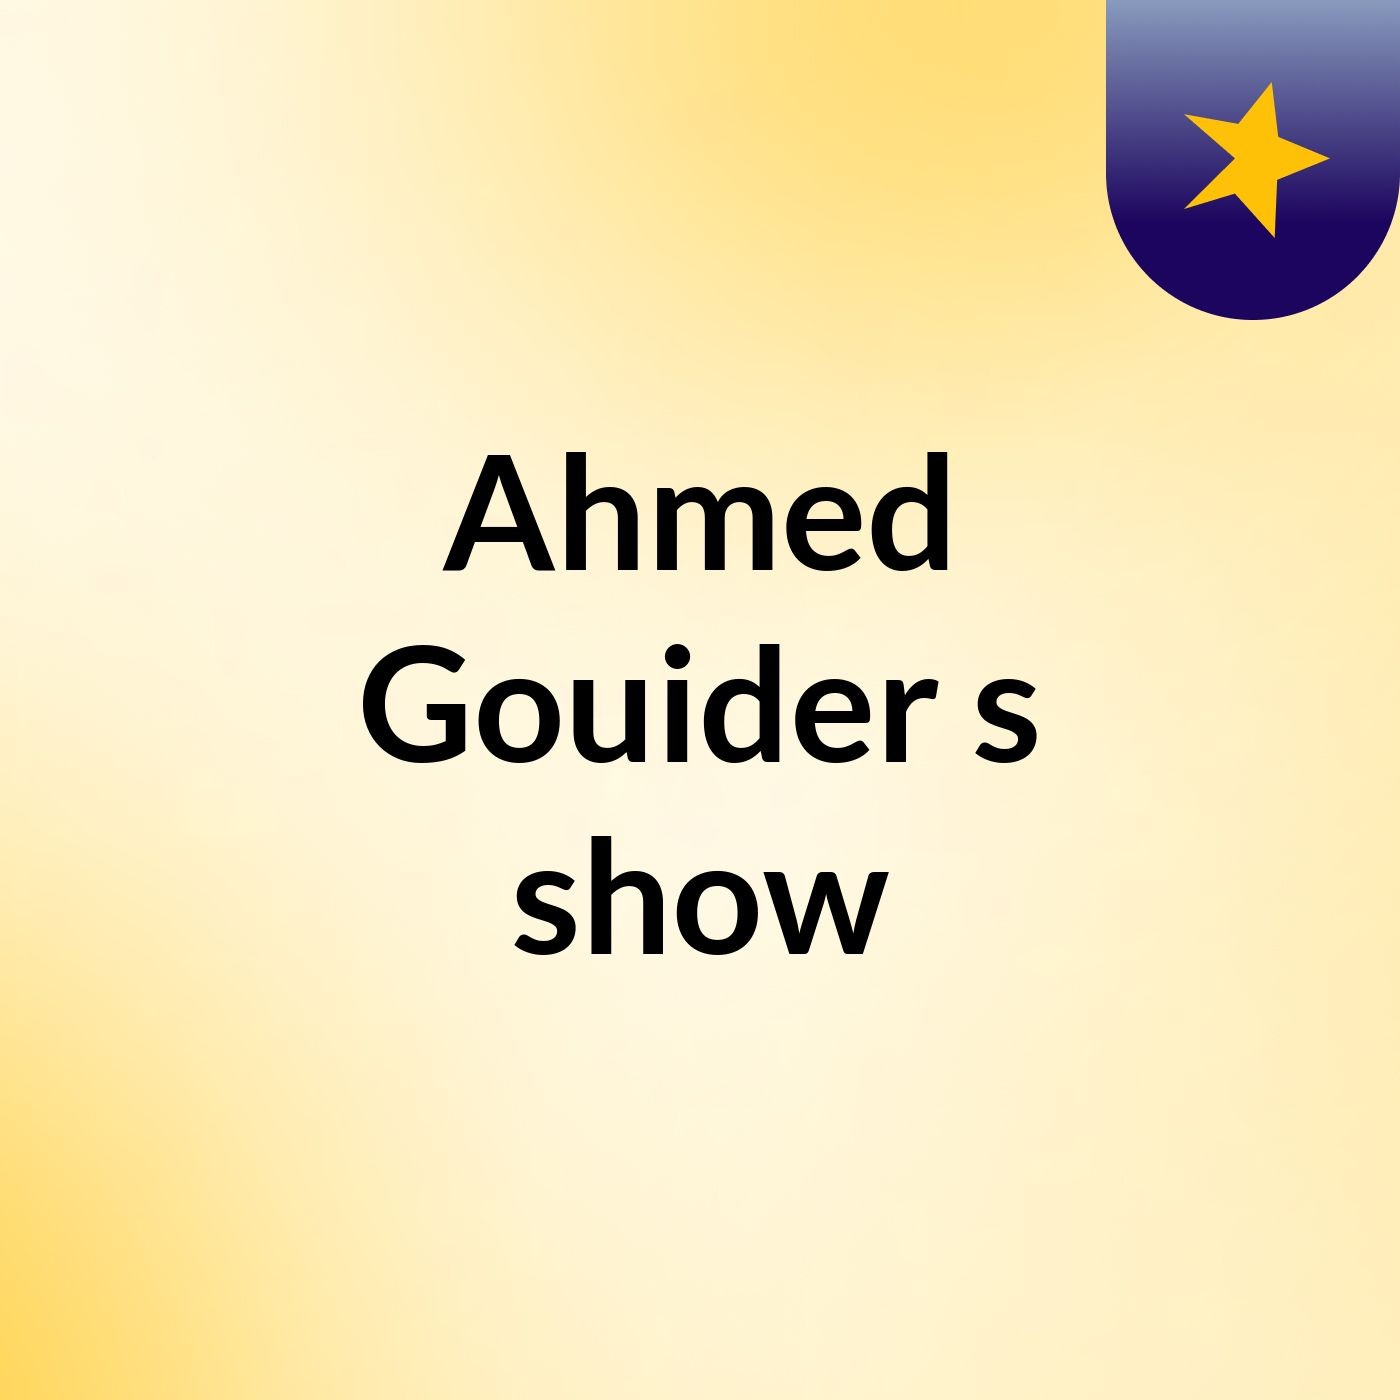 Ahmed Gouider's show